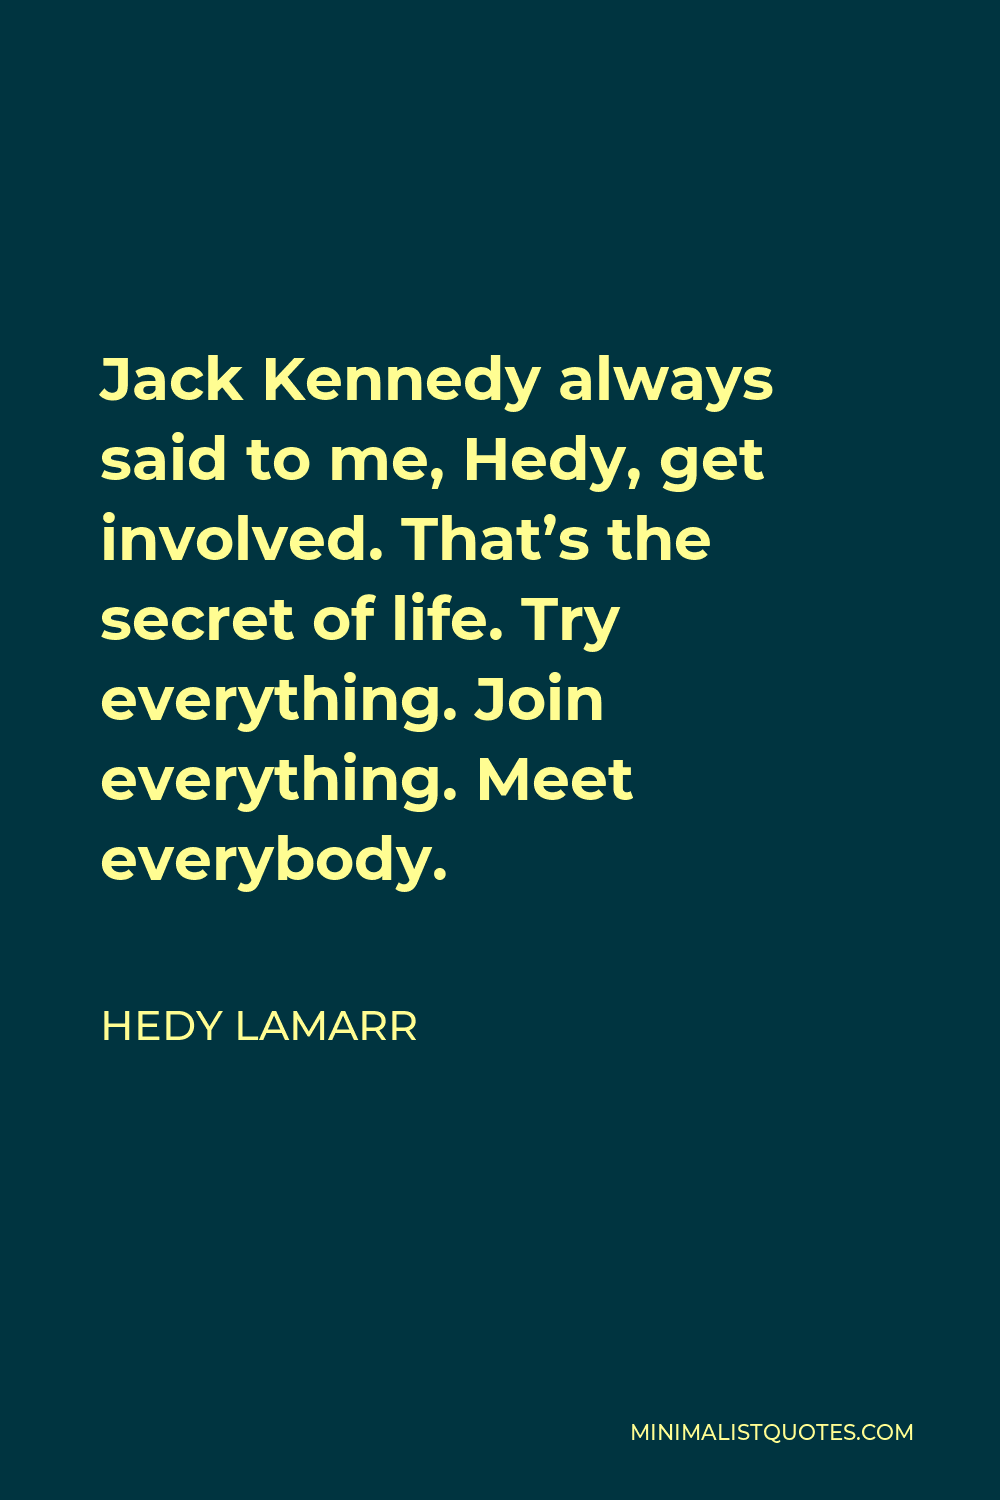 Hedy Lamarr Quote: Jack Kennedy always said to me, Hedy, get involved ...